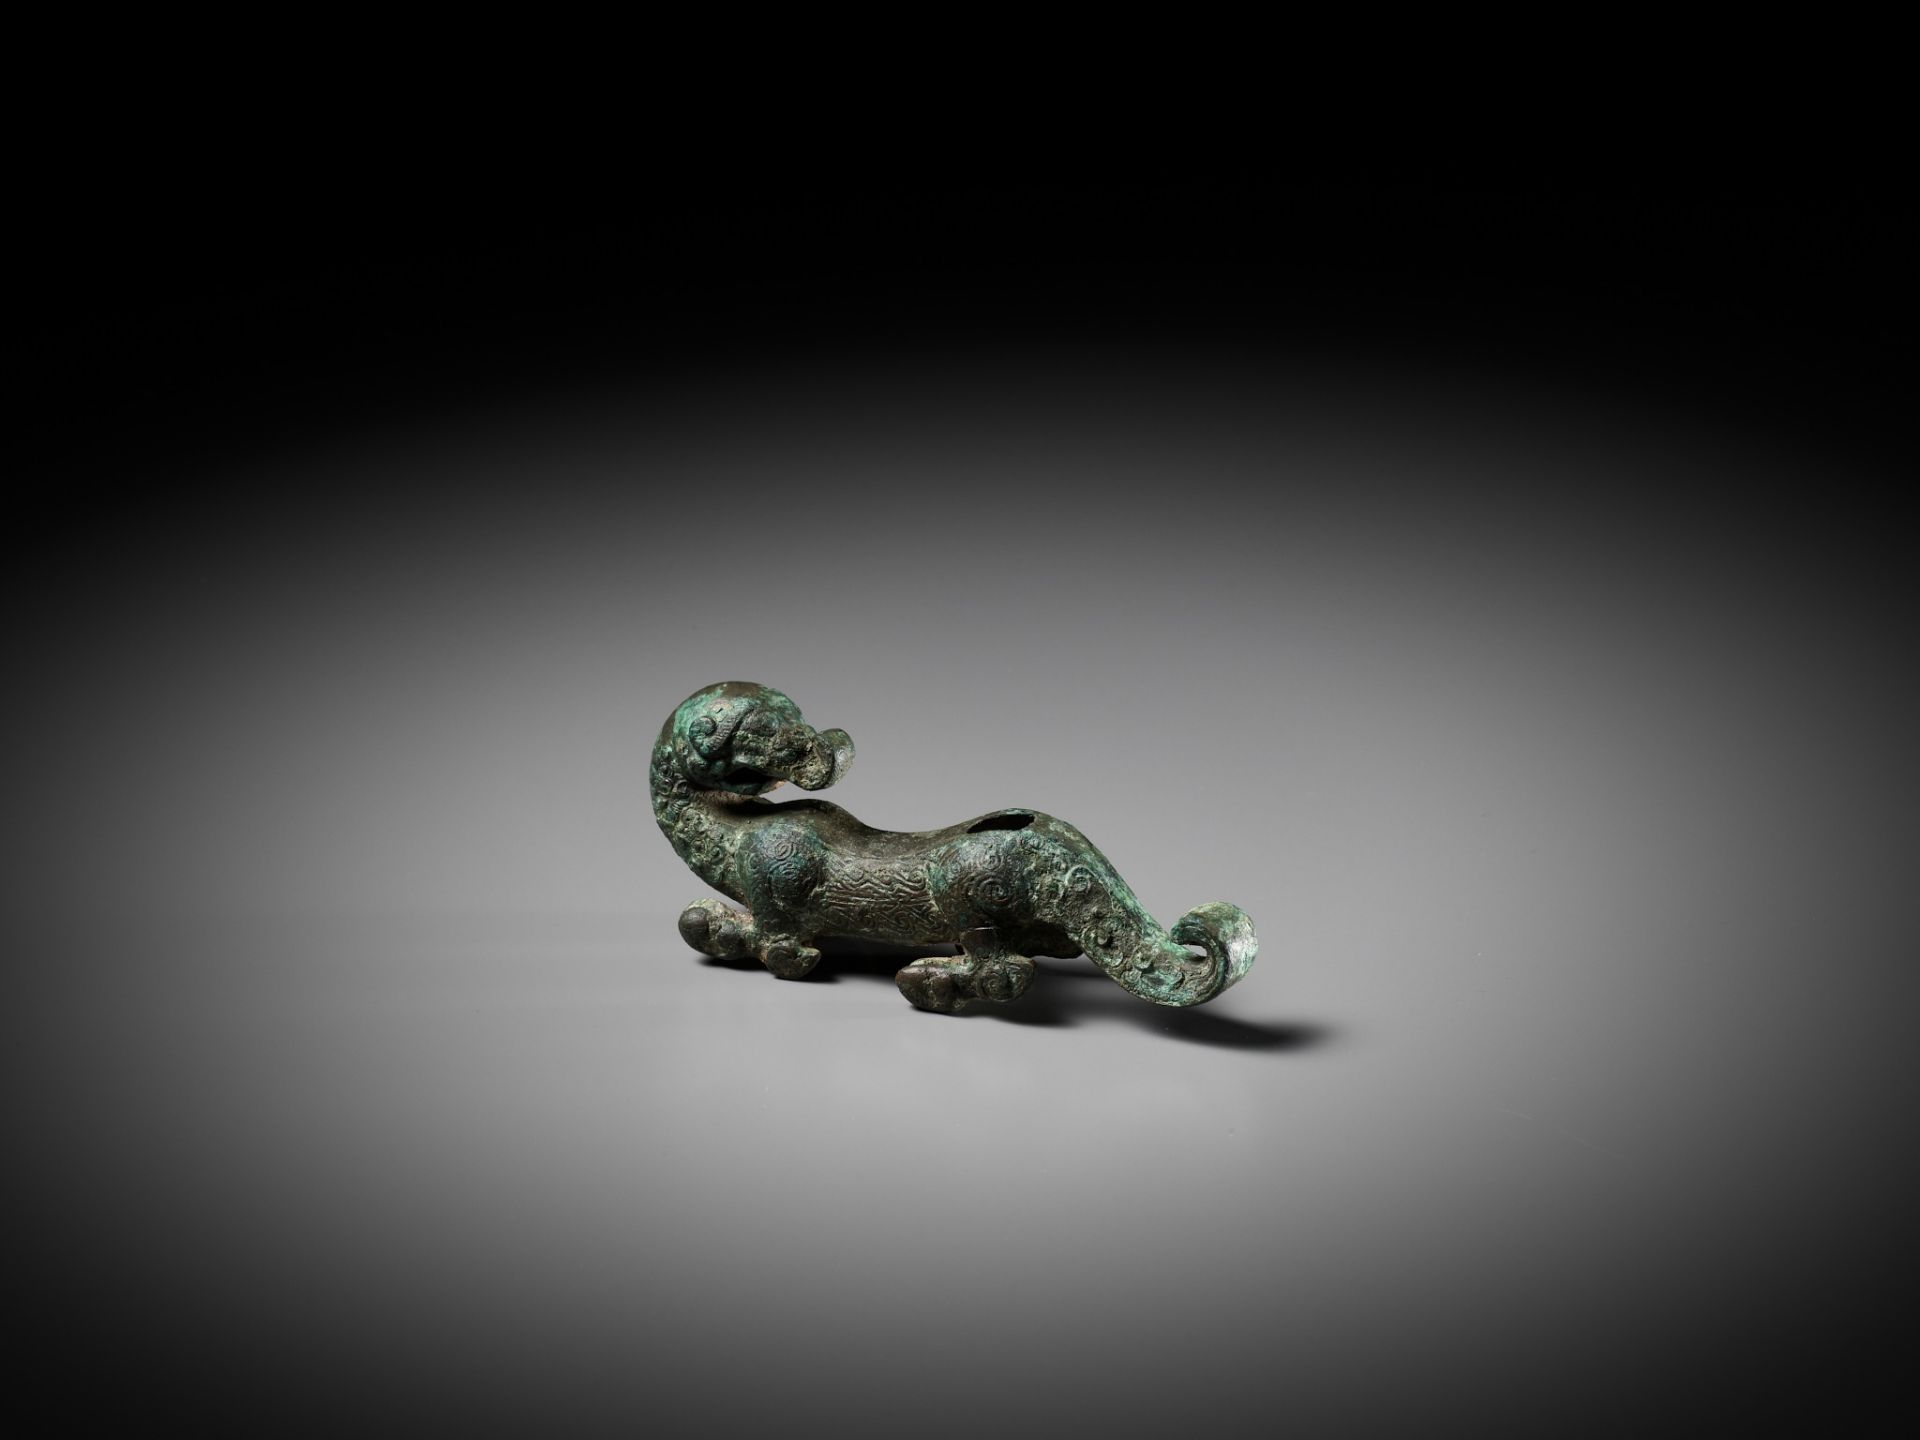 A SUPERB BRONZE FIGURE OF A DRAGON, EASTERN ZHOU DYNASTY, CHINA, 770-256 BC - Image 12 of 25